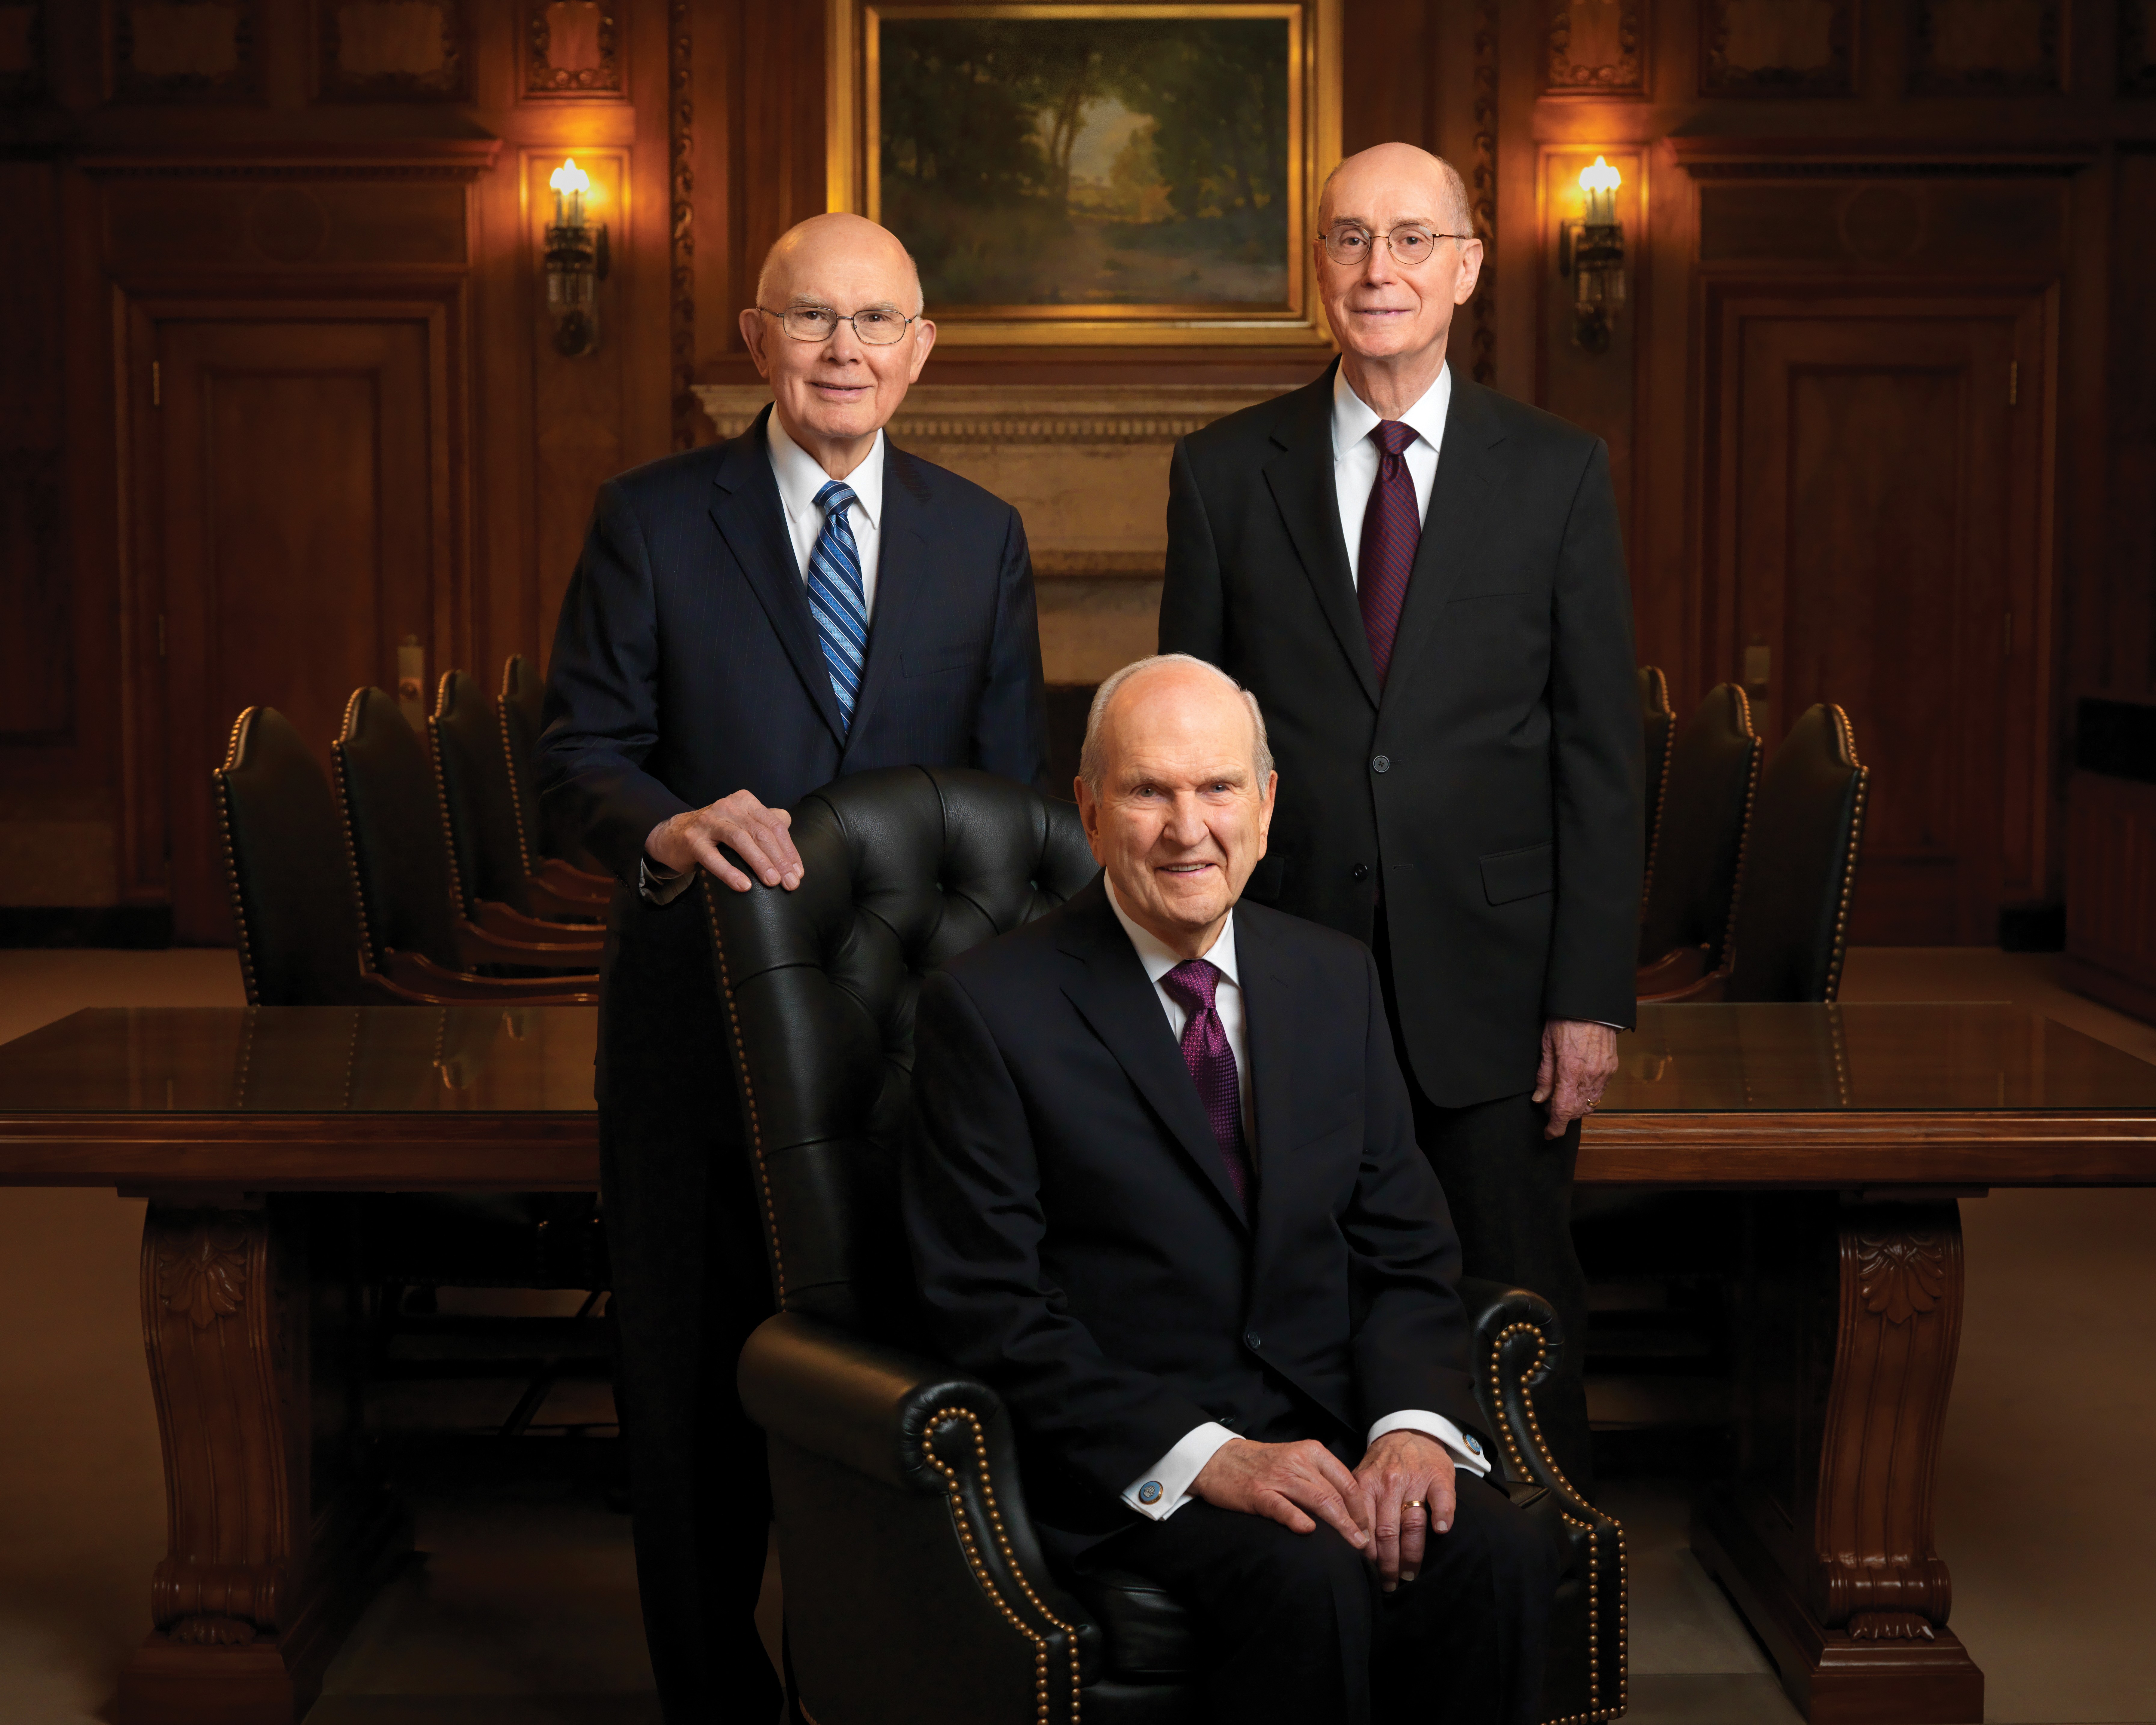 The Official Portrait of the First Presidency.  Photographed January 2018.  Photo of President Russel M. Nelson sitting in an armchair. He is surrounded by his counselors. On the left is President Dallin H. Oaks (1st Counselor) and on the right is President Henry B. Eyring (2nd Counselor). They are in the Church Administration Building. This is a horizontal photograph.